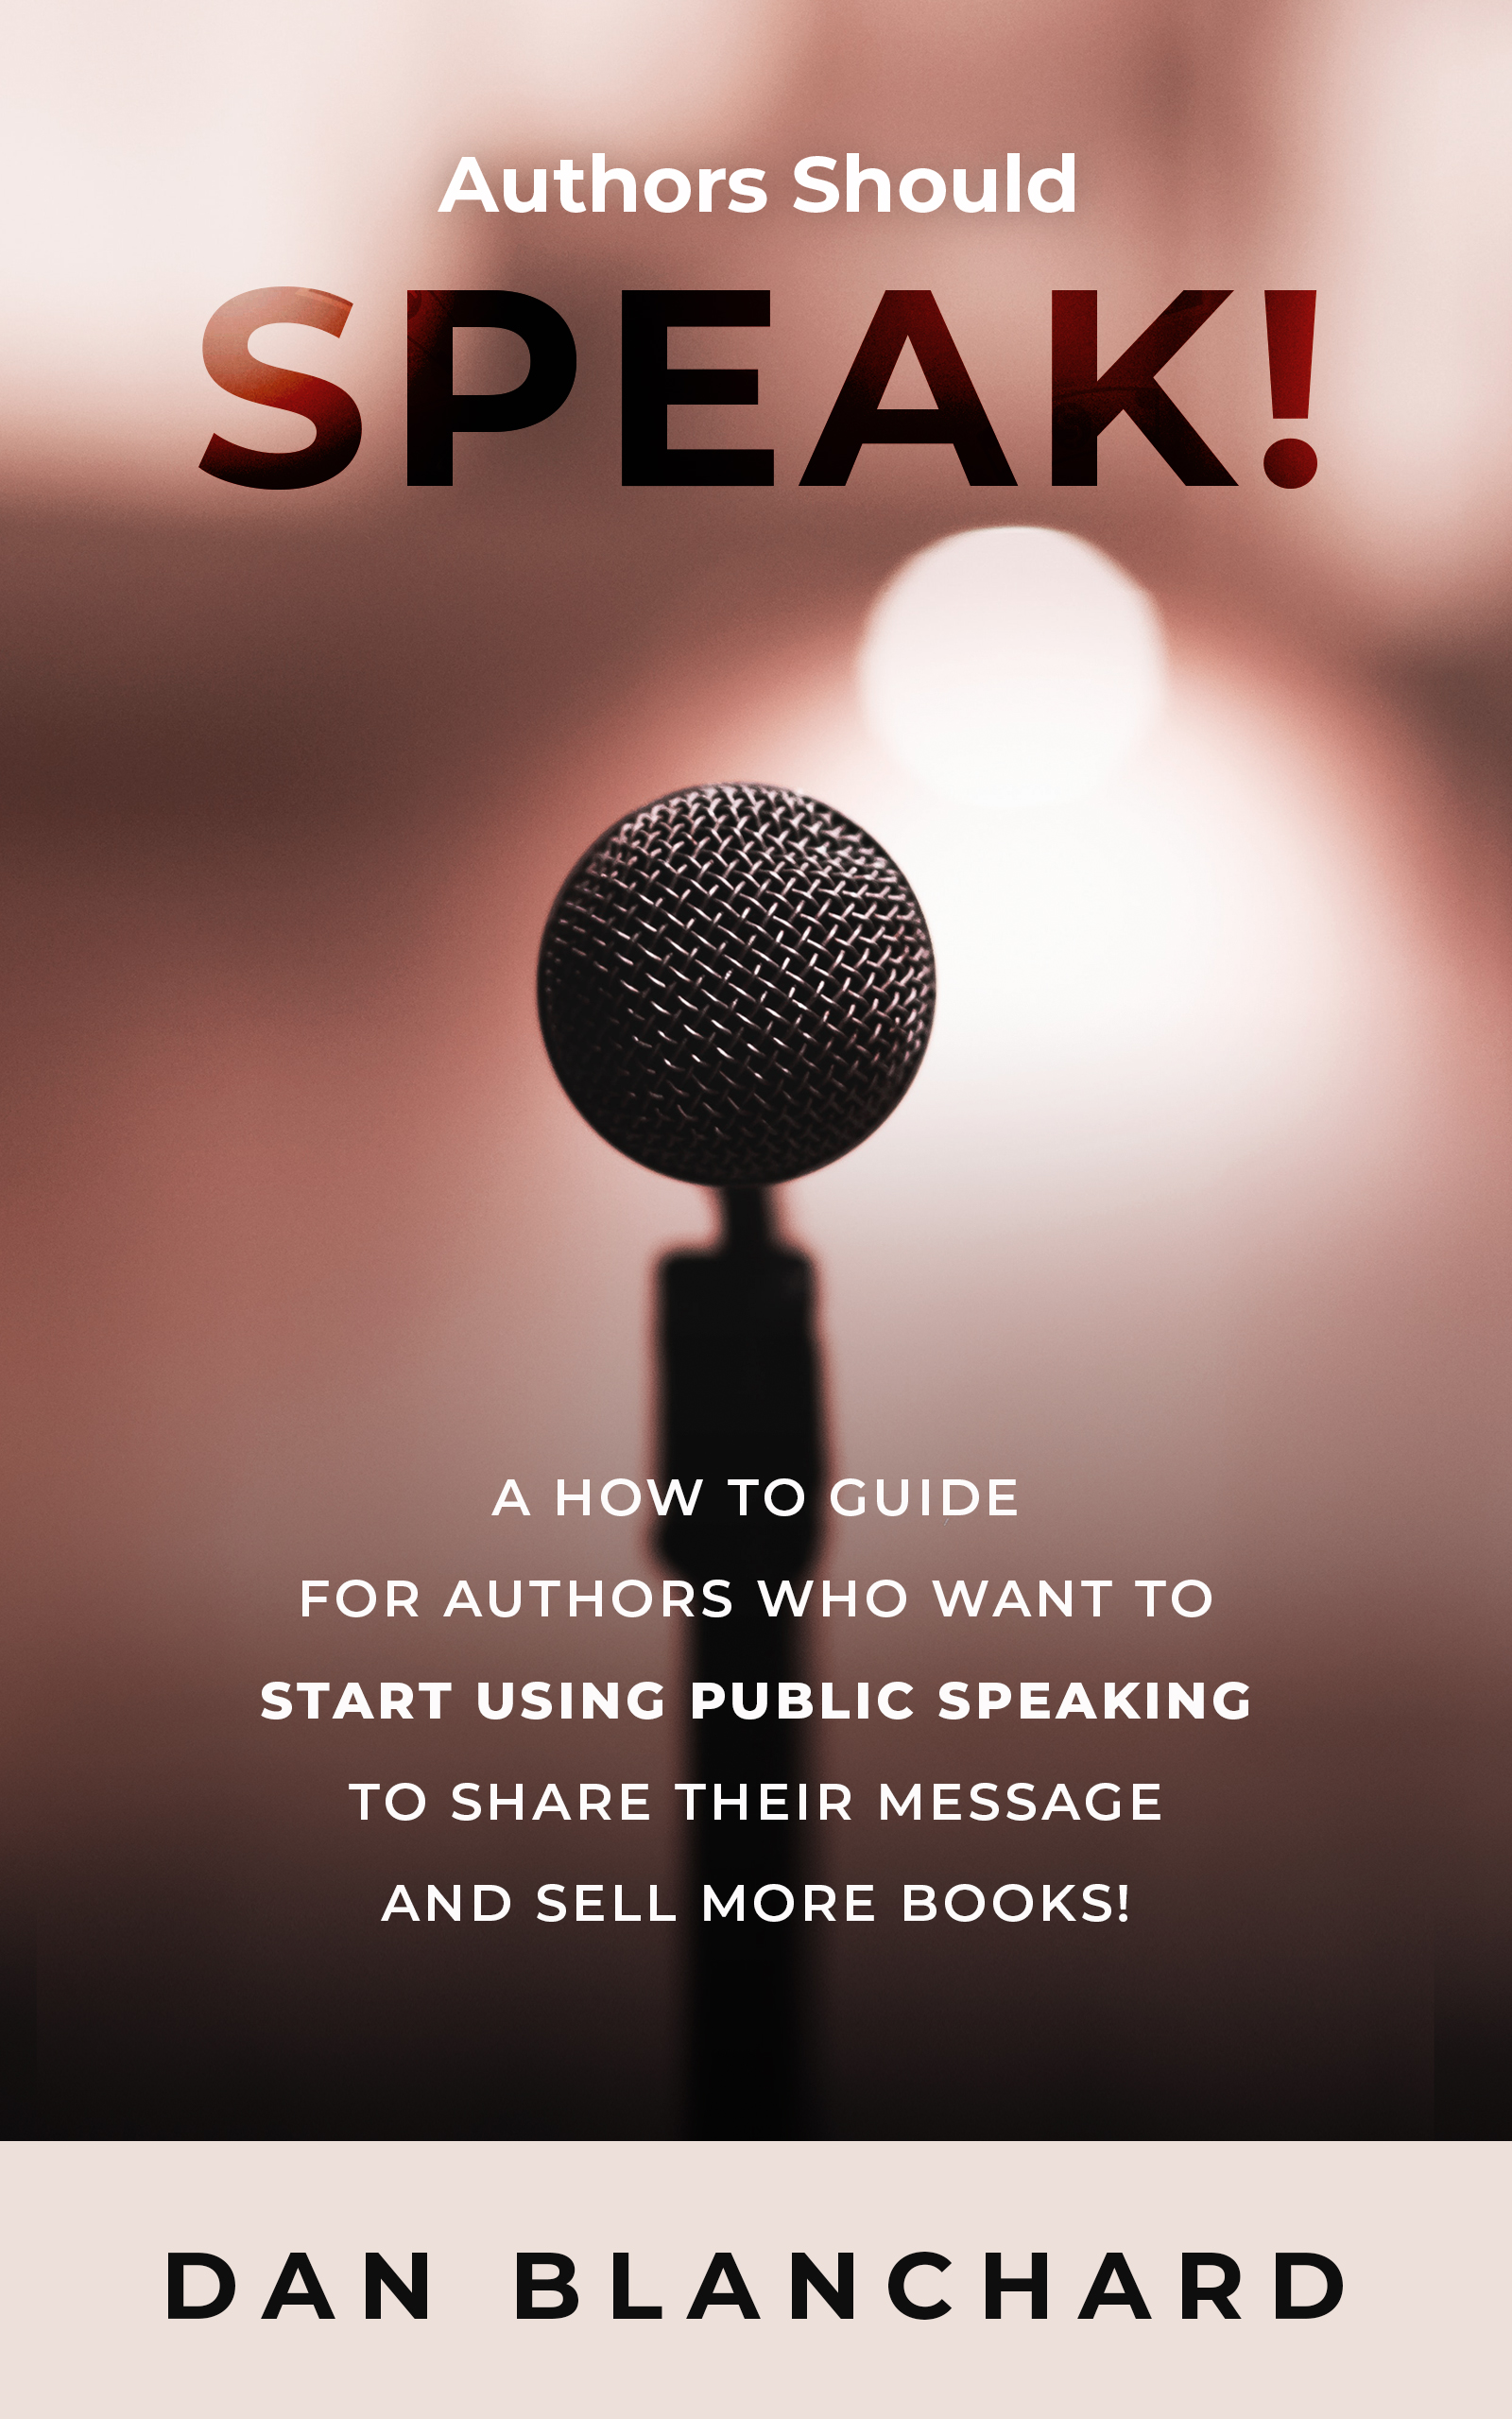 FREE: Authors Should Speak: A How To Guide for Authors Who Want To Start Using Public Speaking To Share Their Message And Sell More Books! by Dan Blanchard